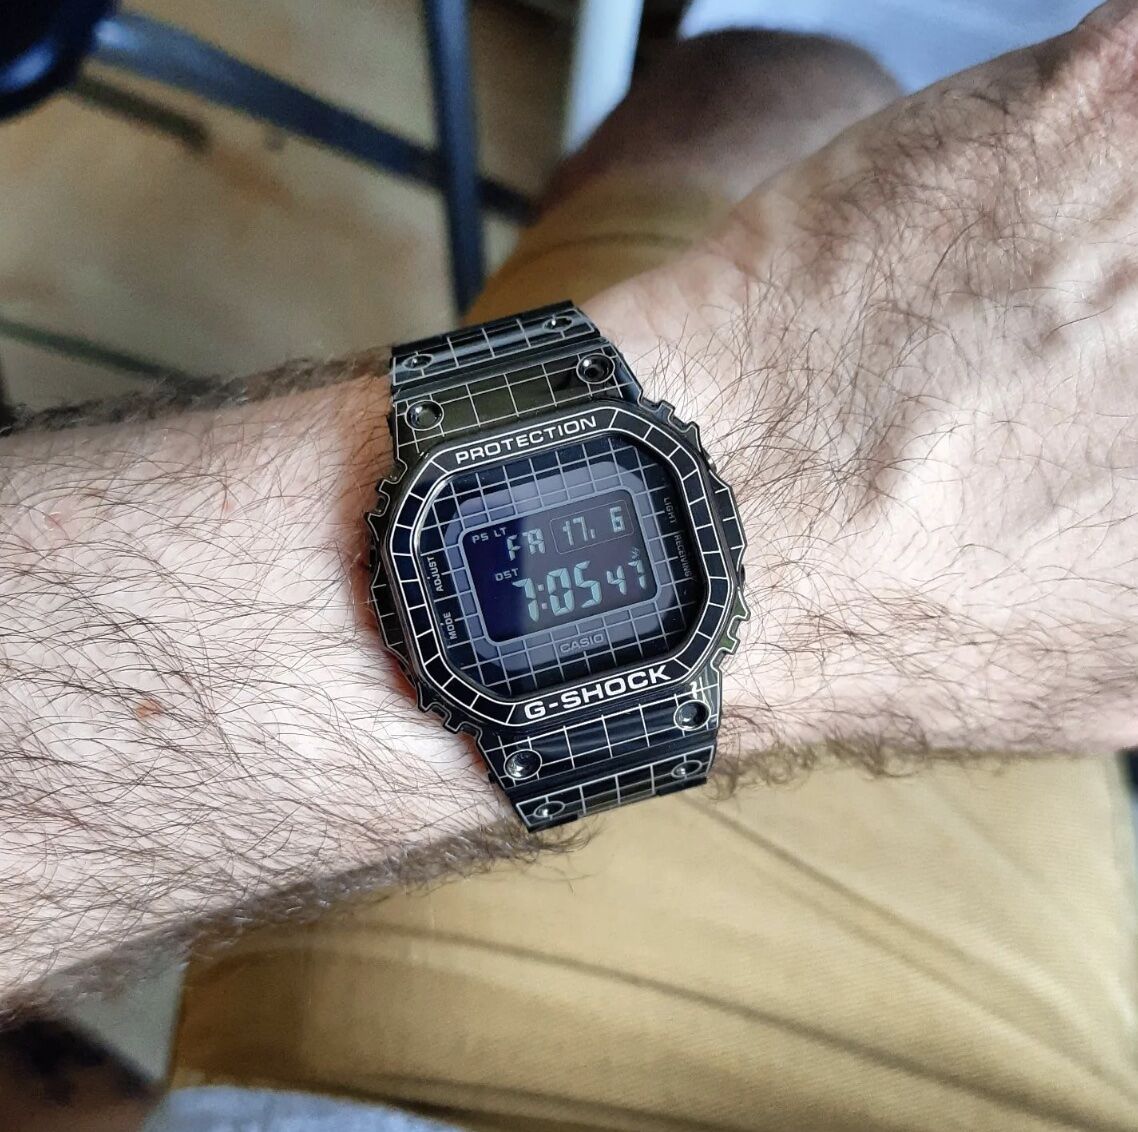 black digital watch on a mans wrist, thigh and floor in the background